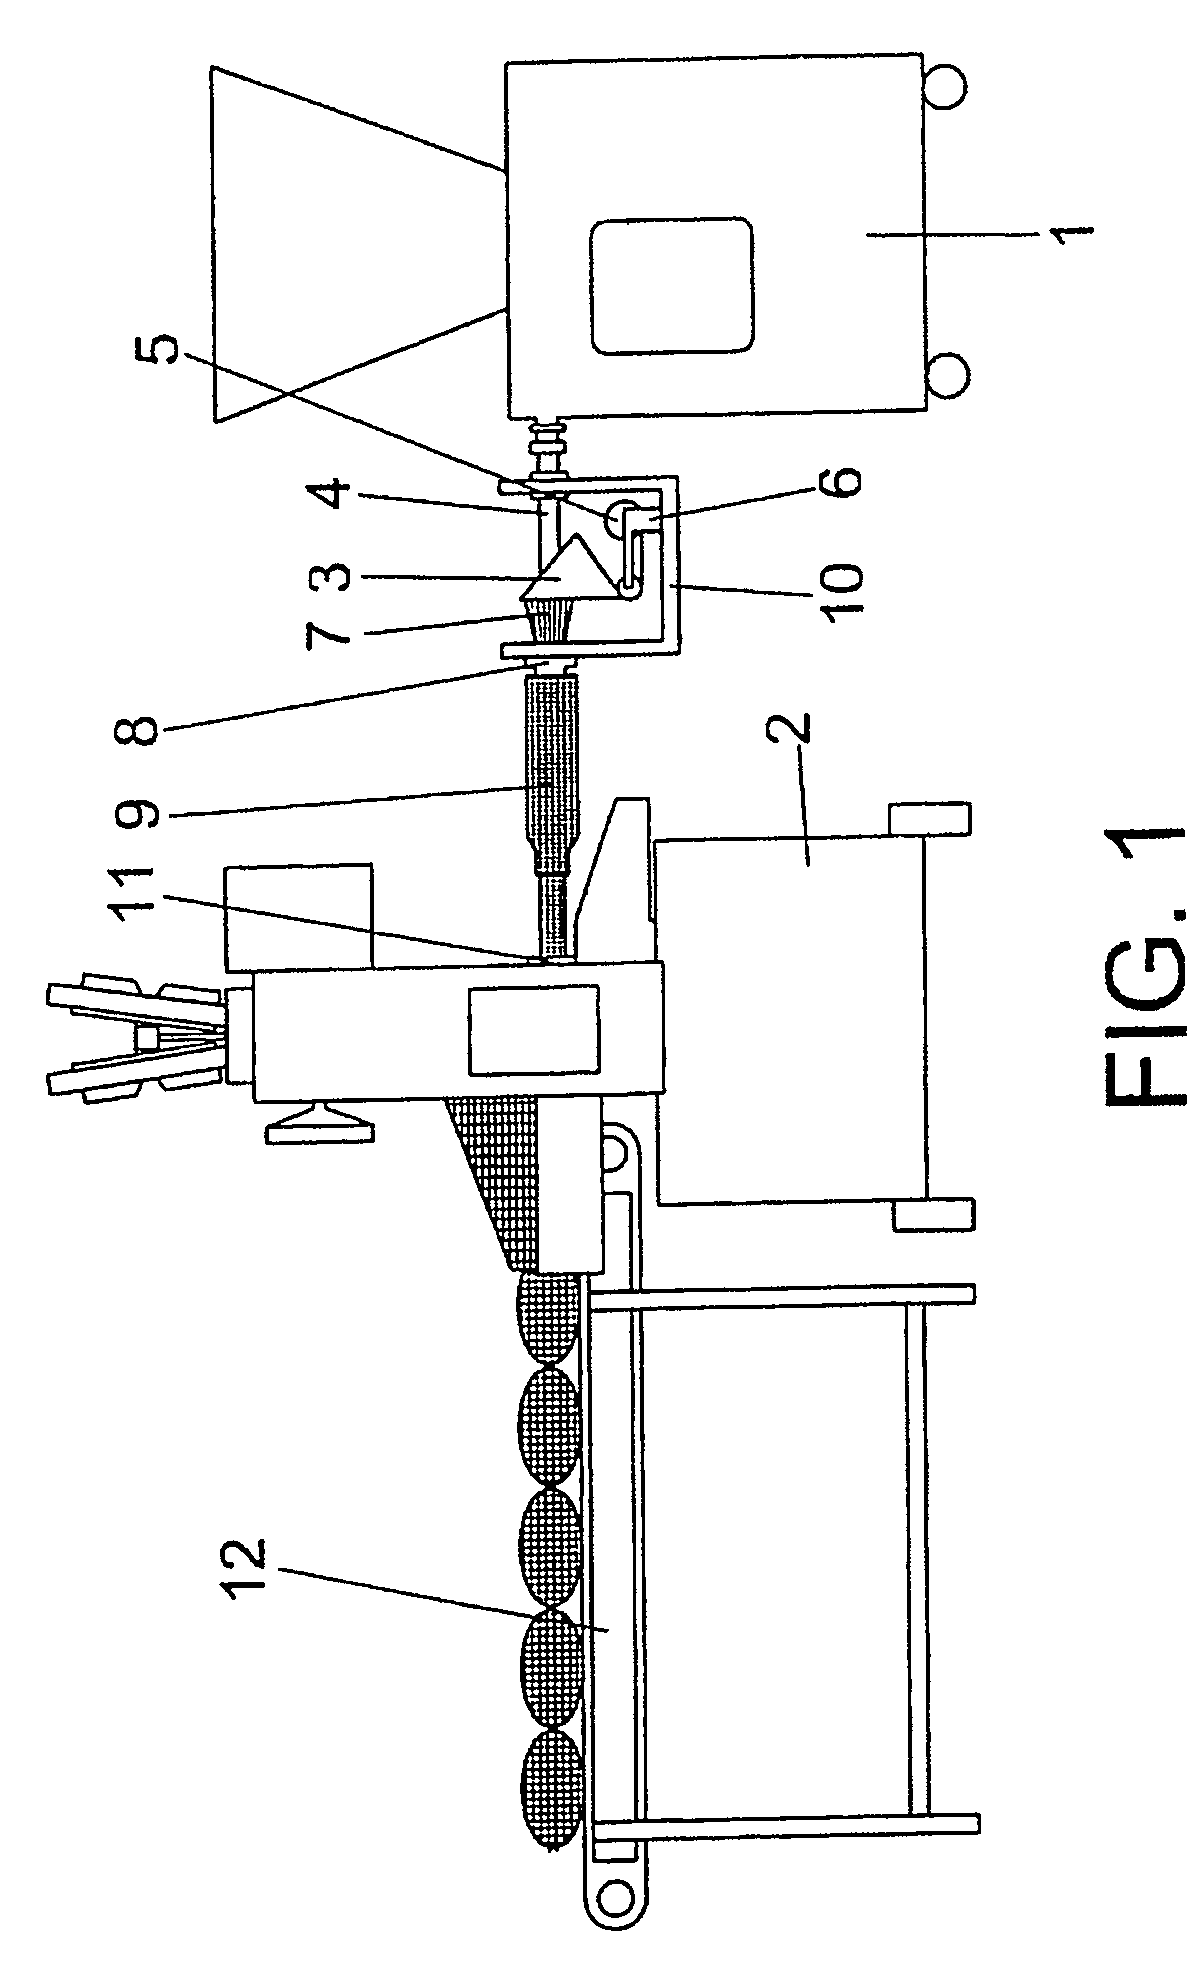 Method and apparatus for the automatic stuffing of meat products into a double casing comprising a sheet and a net